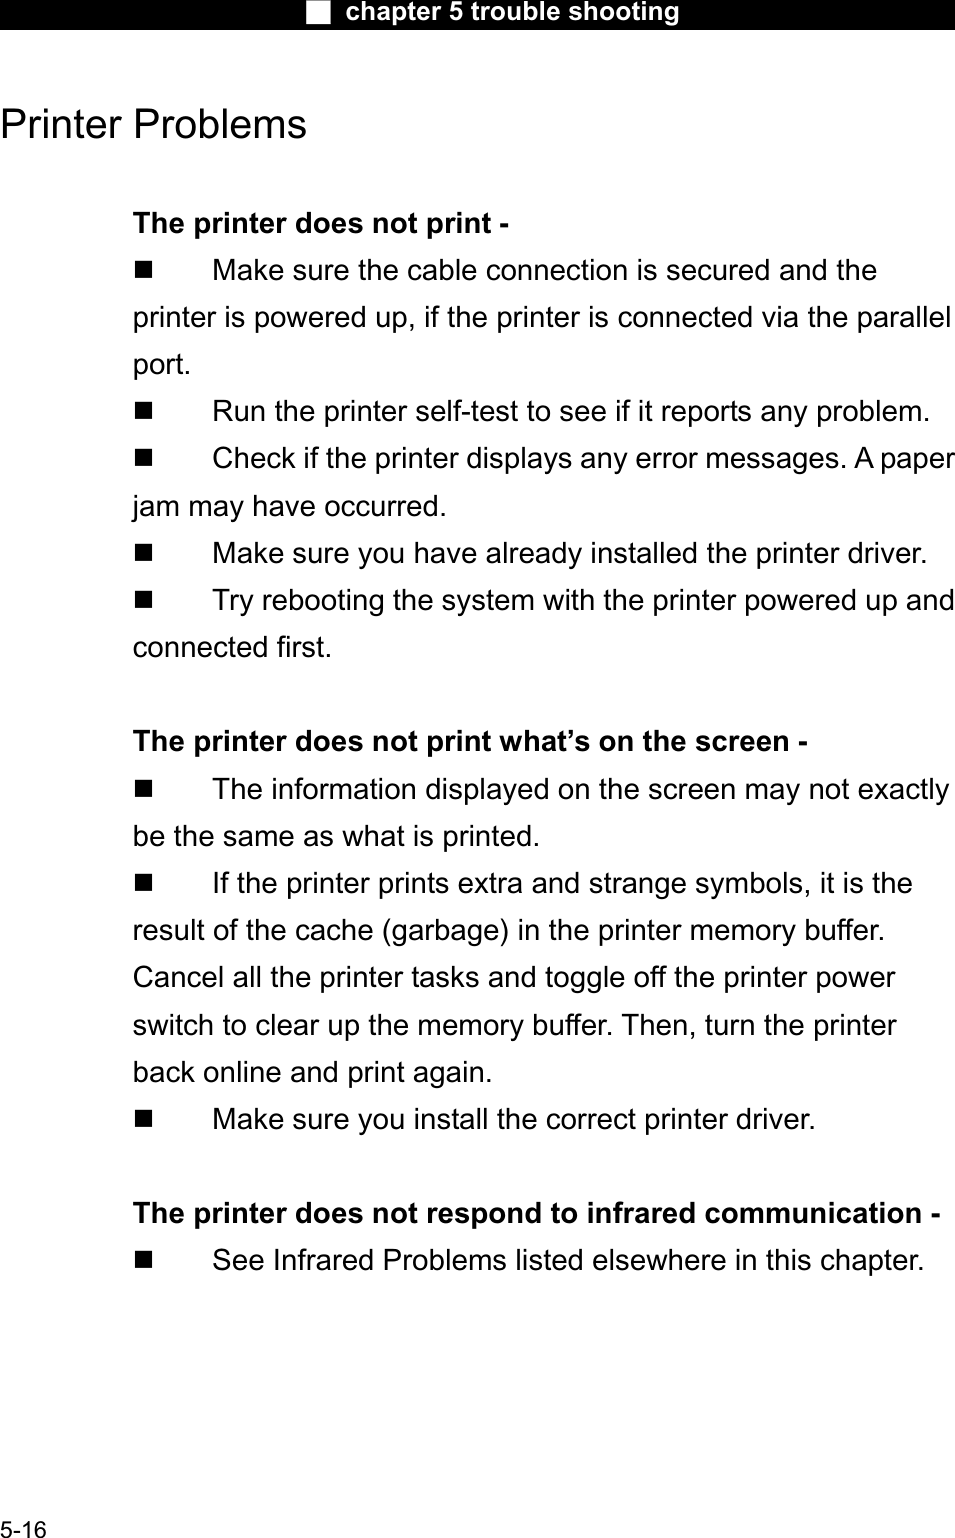 Ϯ chapter 5 trouble shootingPrinter Problems The printer does not print -  Make sure the cable connection is secured and the printer is powered up, if the printer is connected via the parallelport. Run the printer self-test to see if it reports any problem. Check if the printer displays any error messages. A paperjam may have occurred. Make sure you have already installed the printer driver. Try rebooting the system with the printer powered up andconnected first.The printer does not print what’s on the screen -  The information displayed on the screen may not exactly be the same as what is printed. If the printer prints extra and strange symbols, it is theresult of the cache (garbage) in the printer memory buffer.Cancel all the printer tasks and toggle off the printer powerswitch to clear up the memory buffer. Then, turn the printer back online and print again. Make sure you install the correct printer driver.The printer does not respond to infrared communication -  See Infrared Problems listed elsewhere in this chapter.5-16